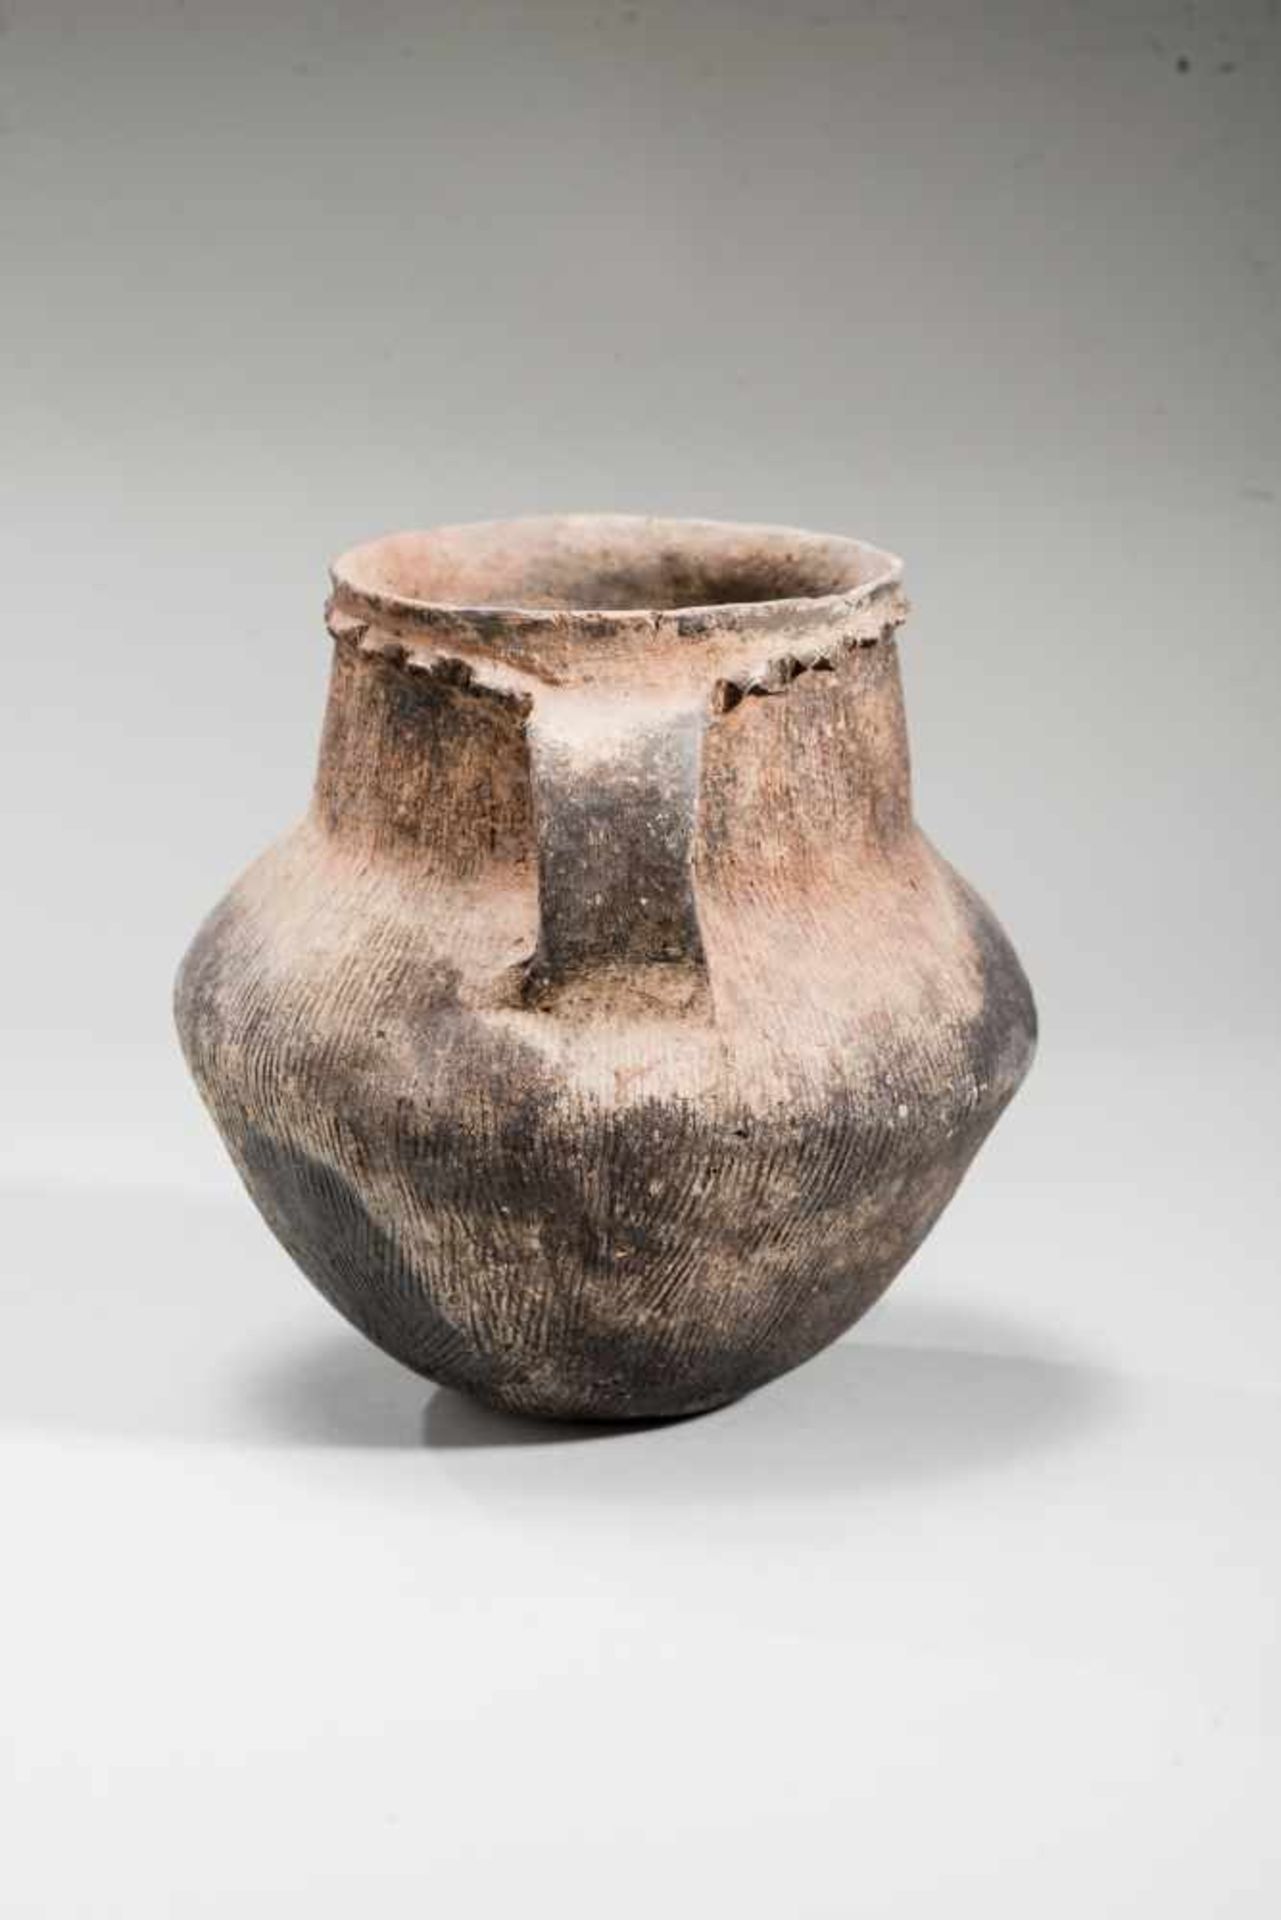 SMALL VESSEL WITH HANDLES - YANGSHAO CULTURETerracotaChina, Yangshao culture, Majiayao style, c. - Image 3 of 7